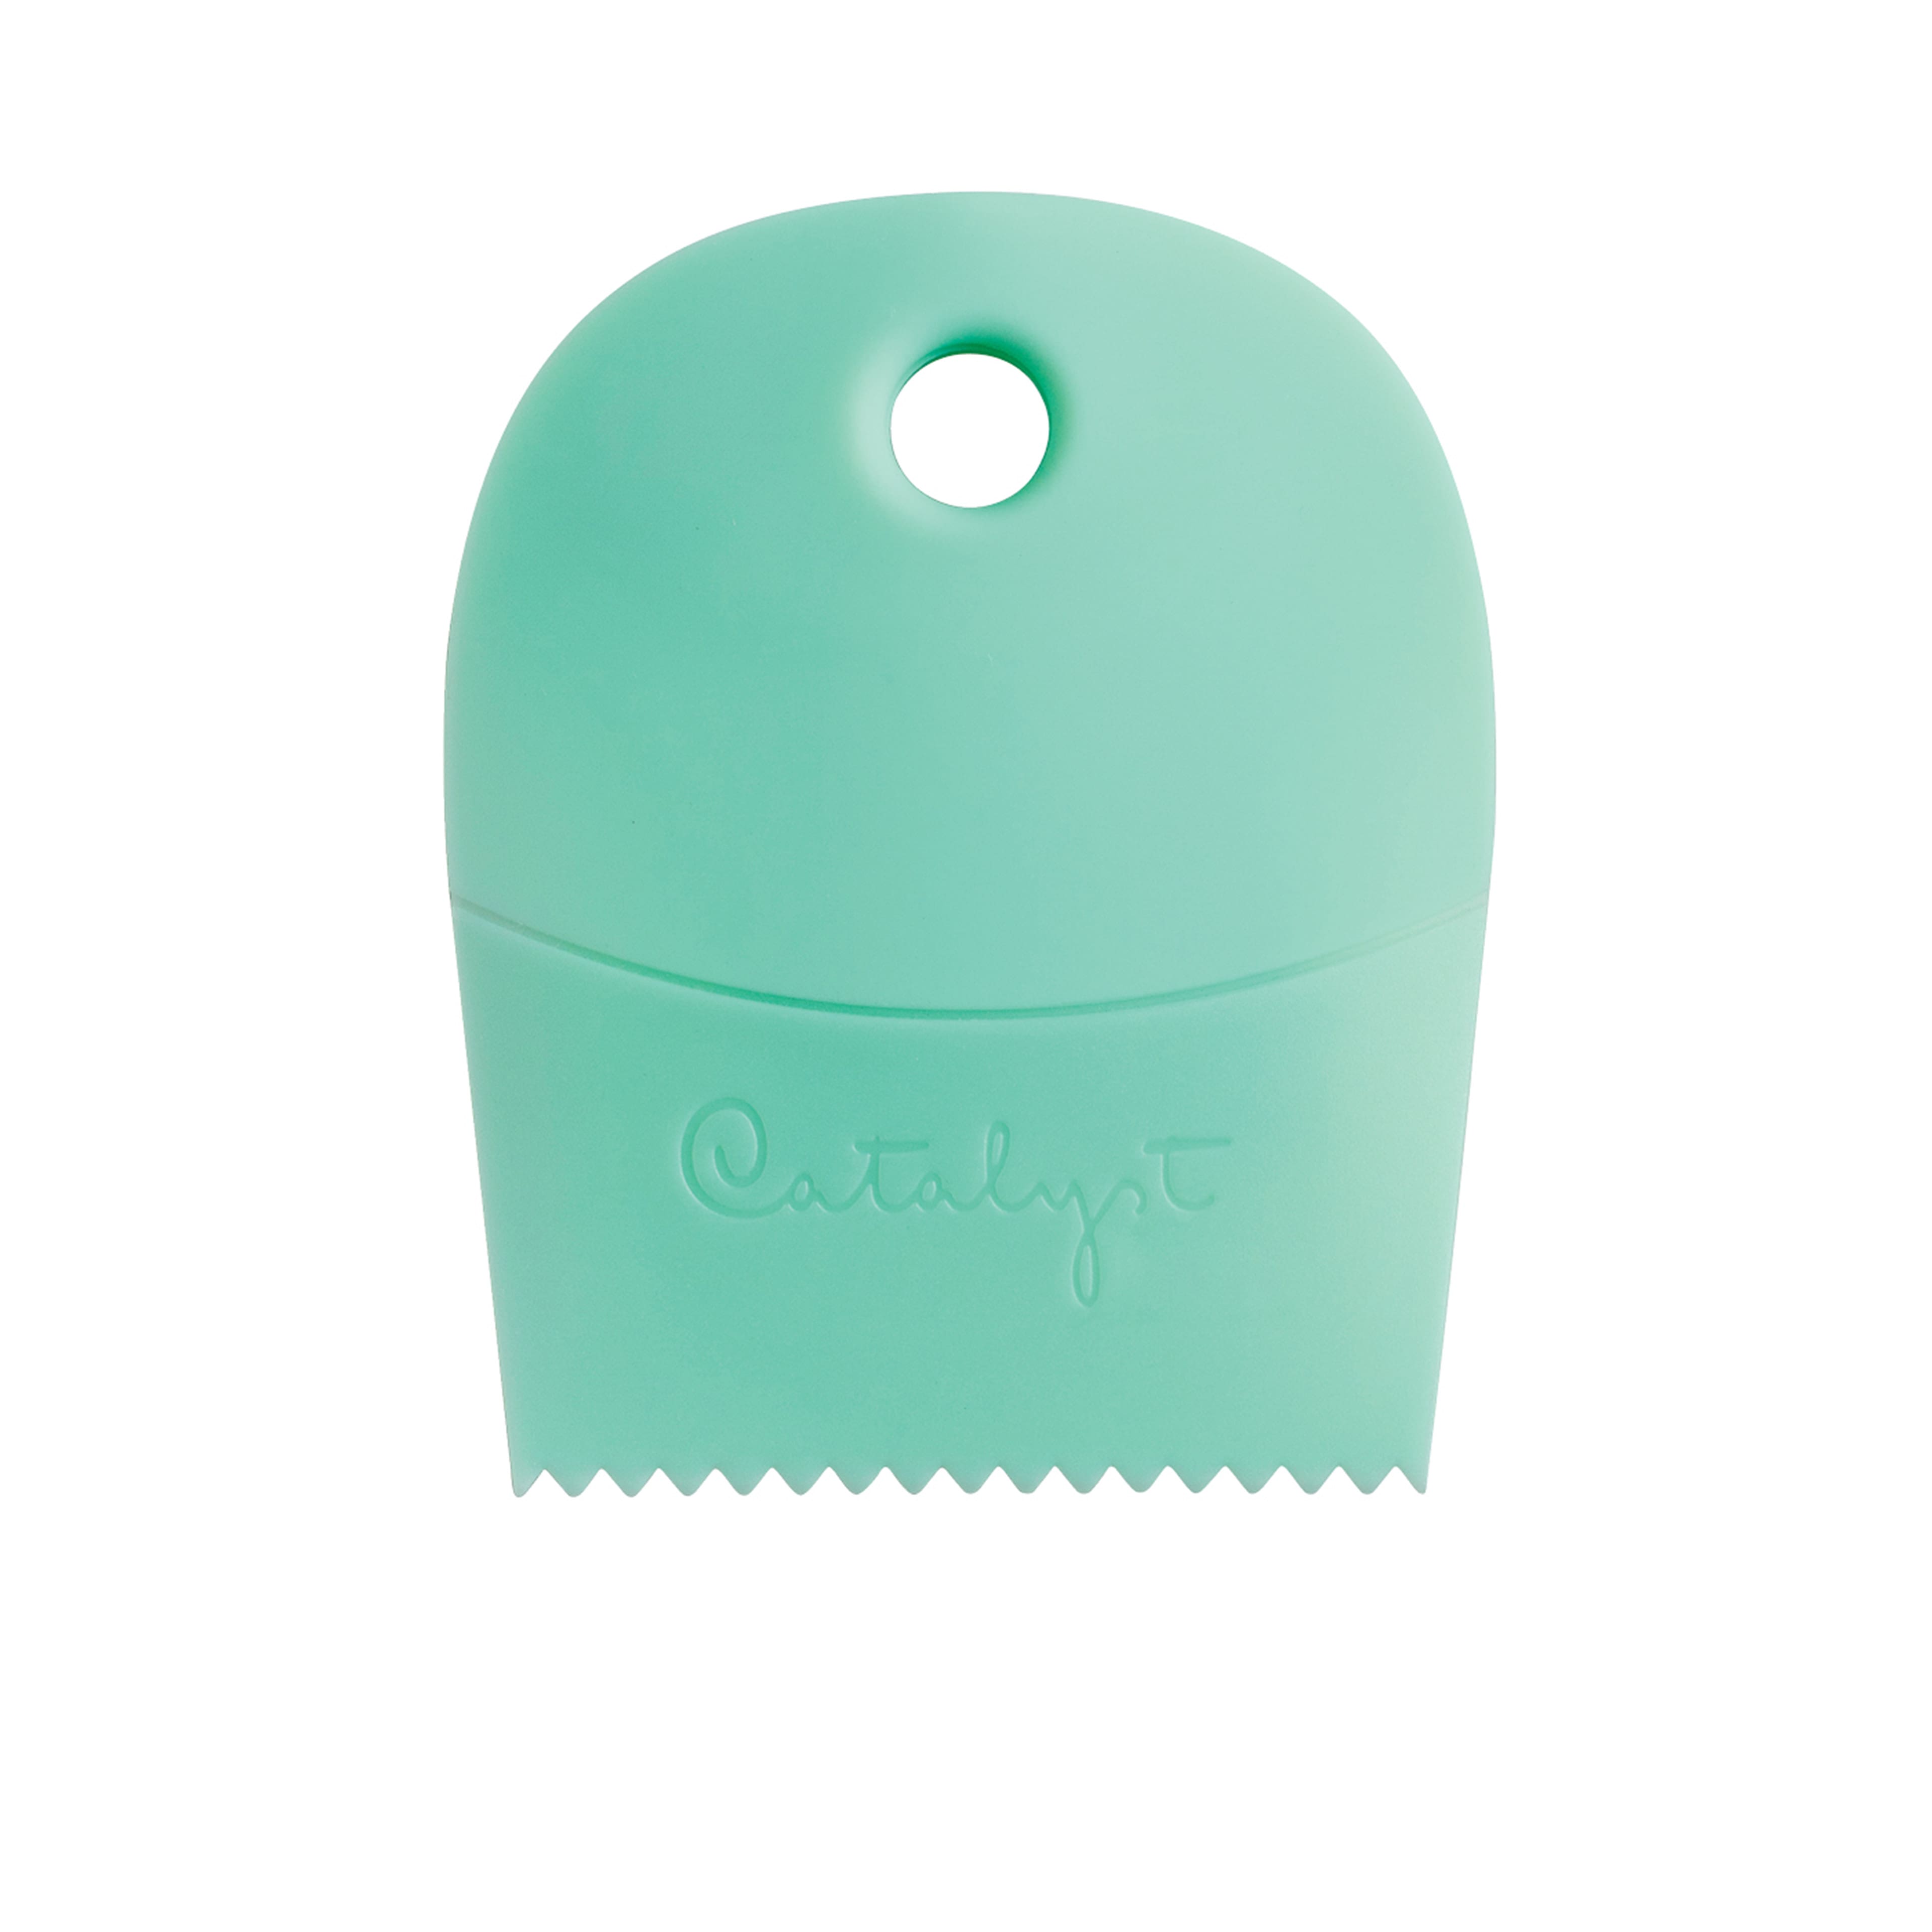 Pendant Clay Cutters by Craft Smart®